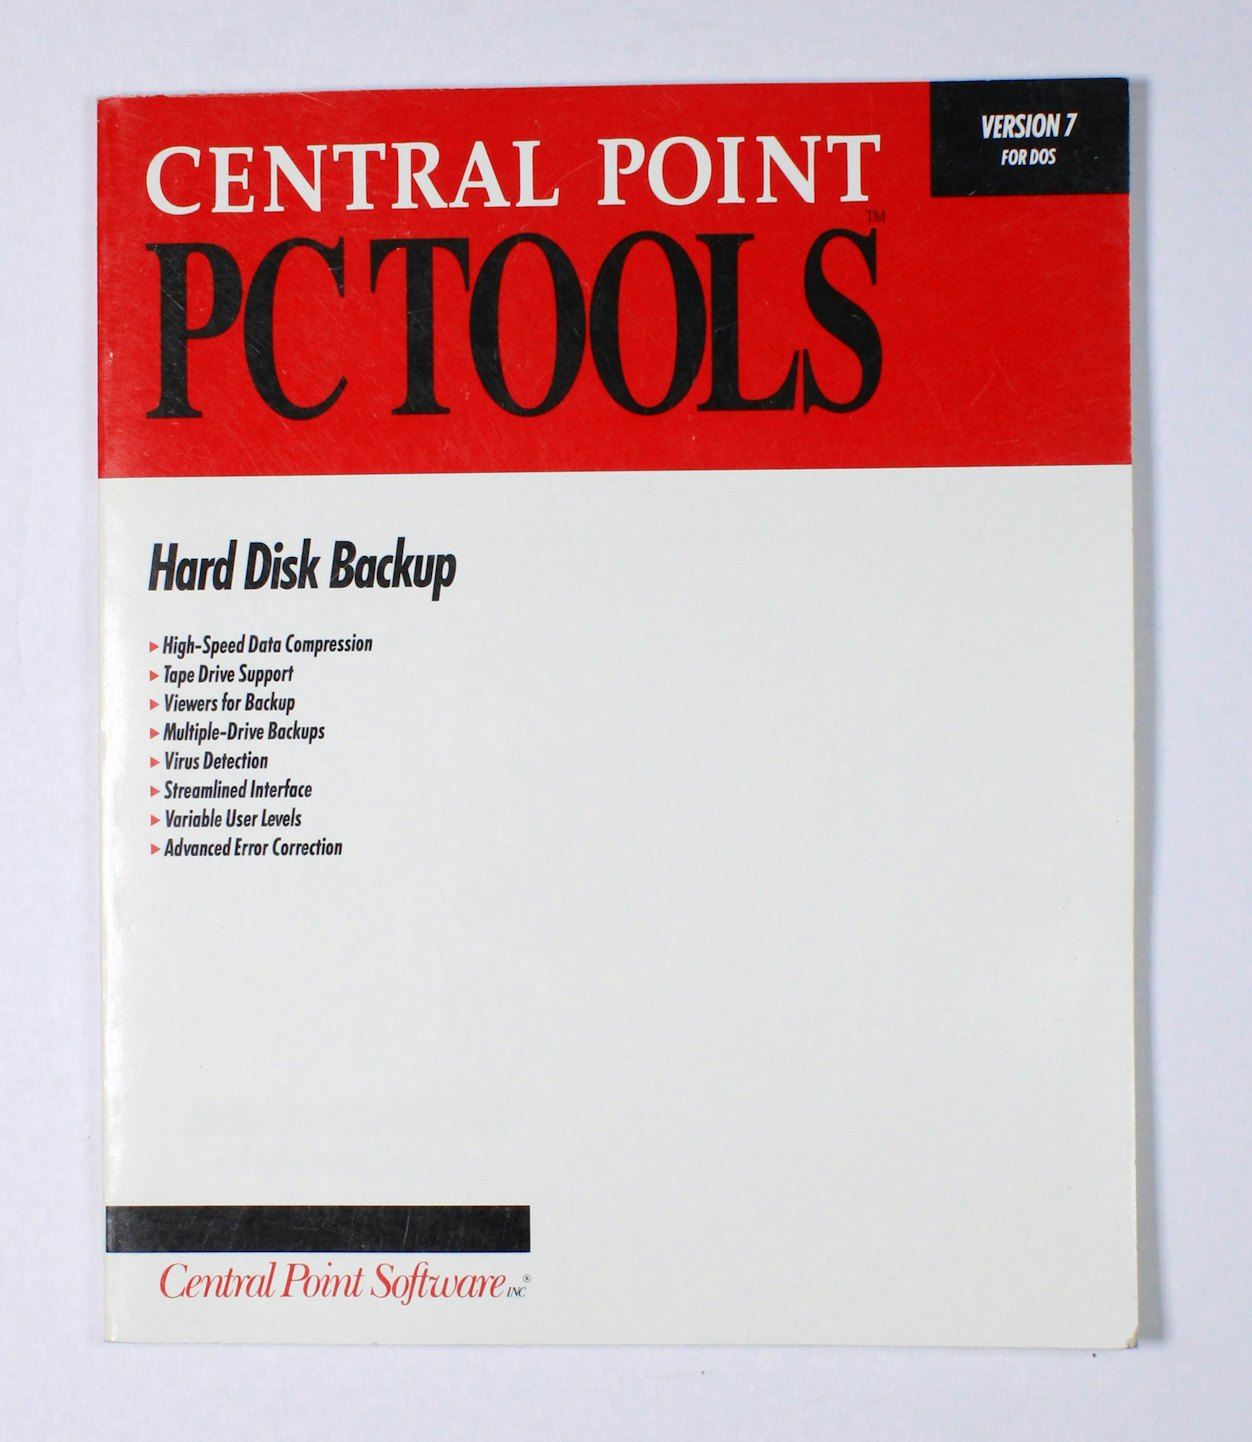 Central Point PC Tools: Hard Disk Backup